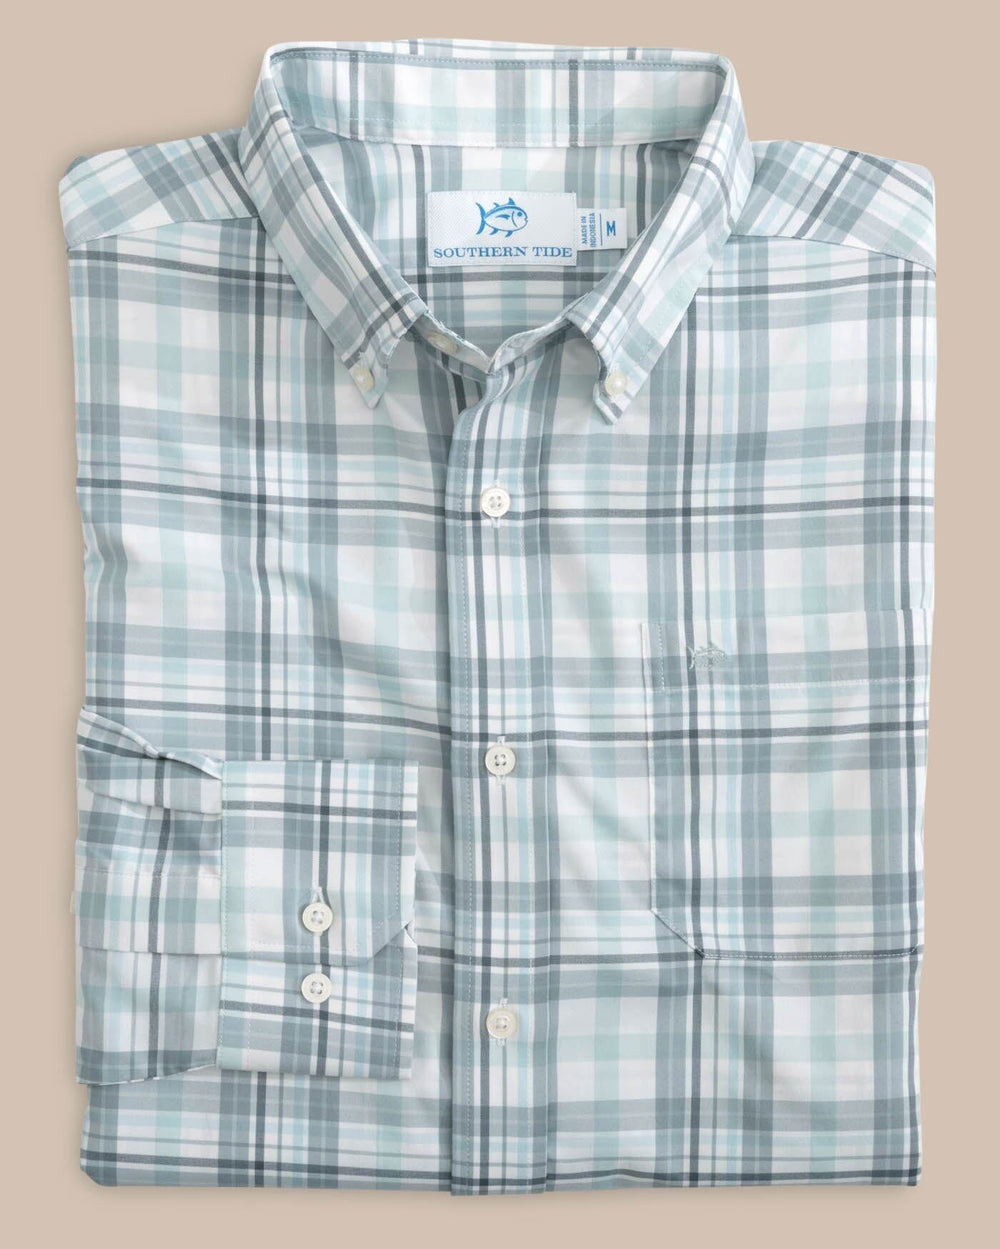 The folded view of the Southern Tide Durwood Plaid Intercoastal Sport Shirts by Southern Tide - Summer Aqua